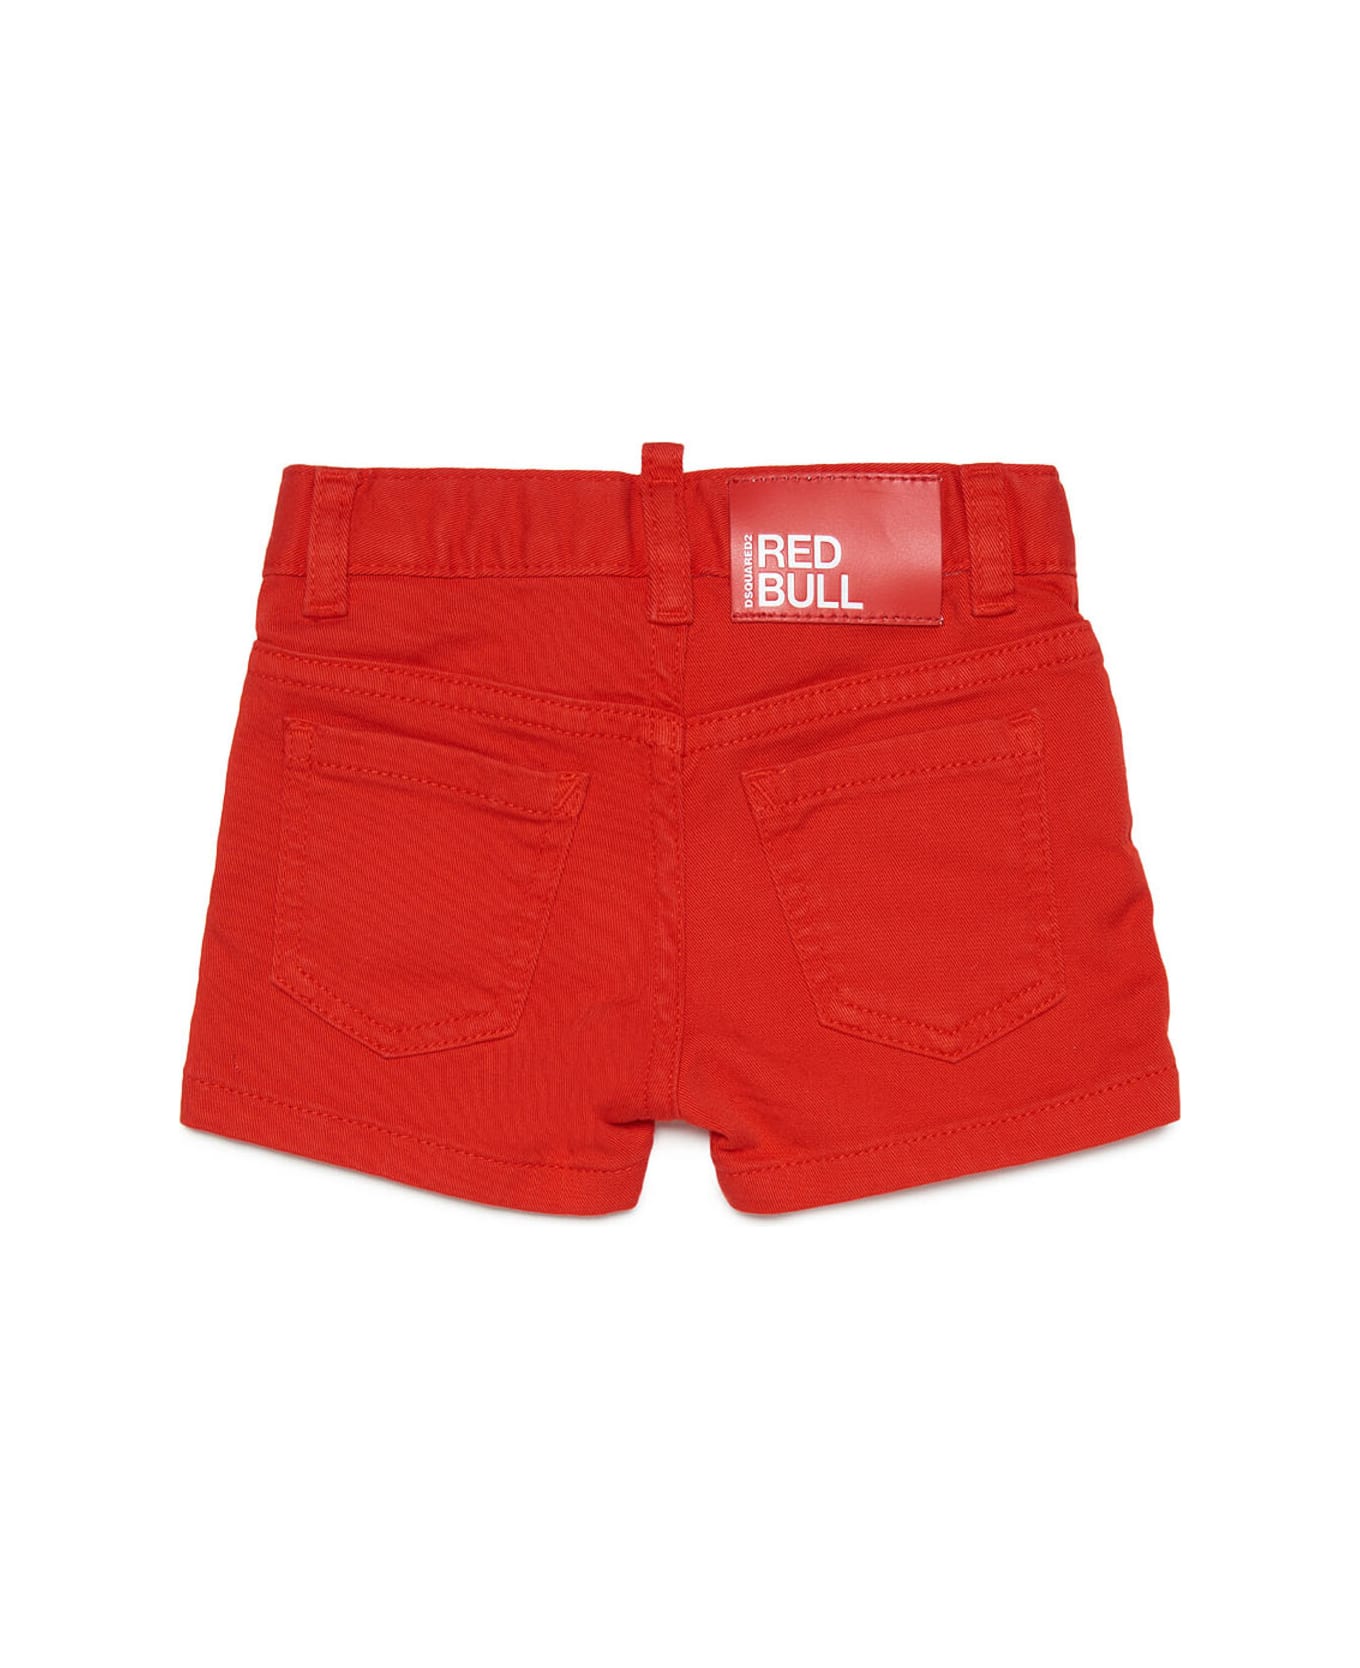 Dsquared2 D2p62cb-eco Shorts Dsquared Red Shorts Made Of Organic Cotton Denim - Fiery red